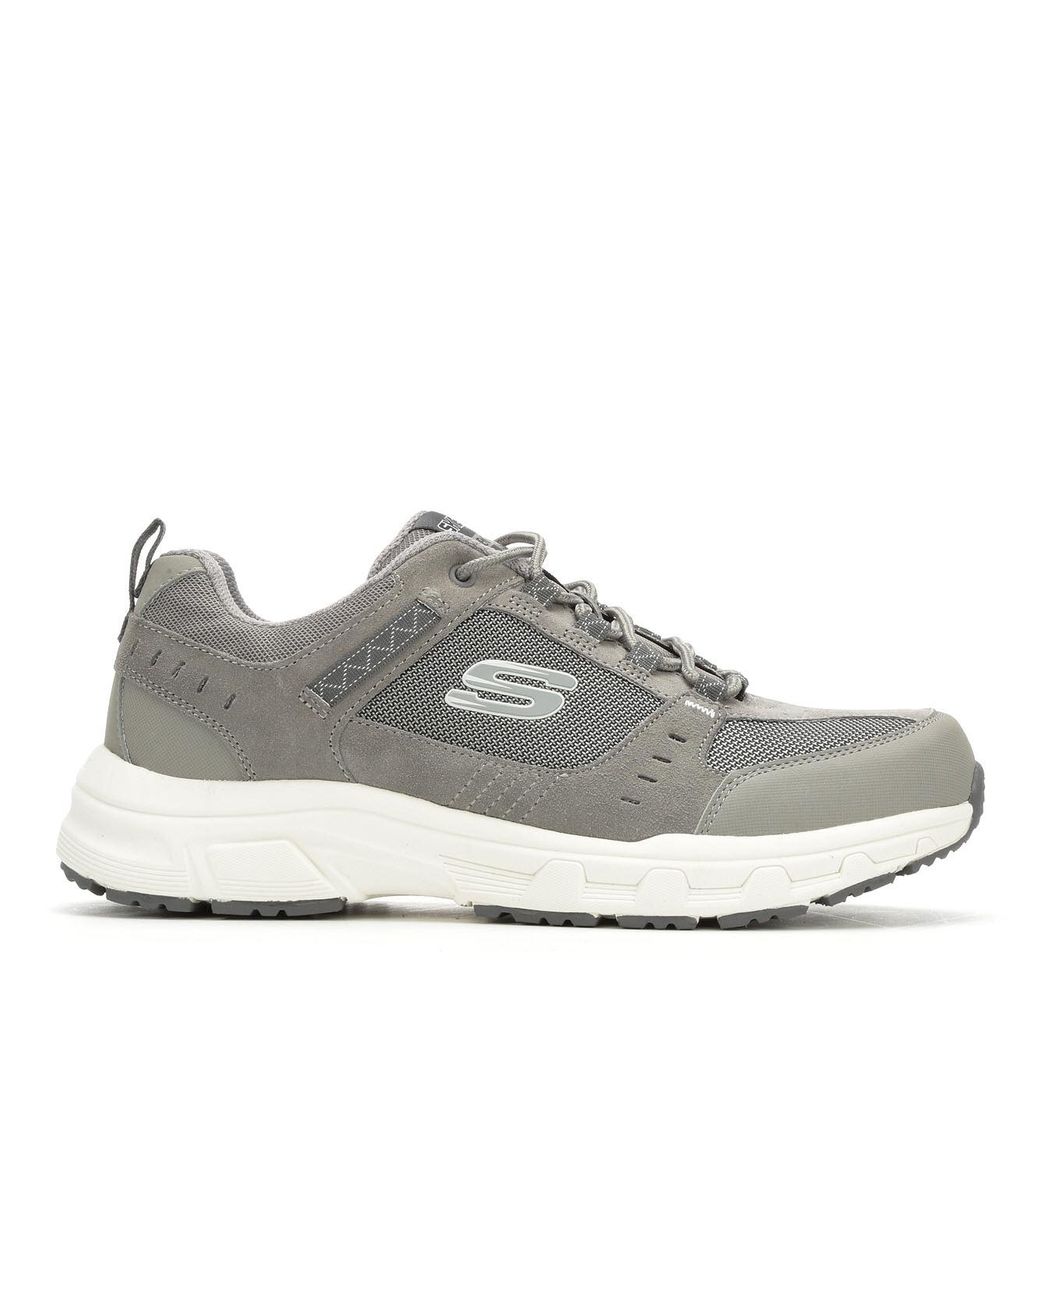 Skechers Synthetic Oak Canyon 51893 Athletic Shoe in Grey,White (Gray ...